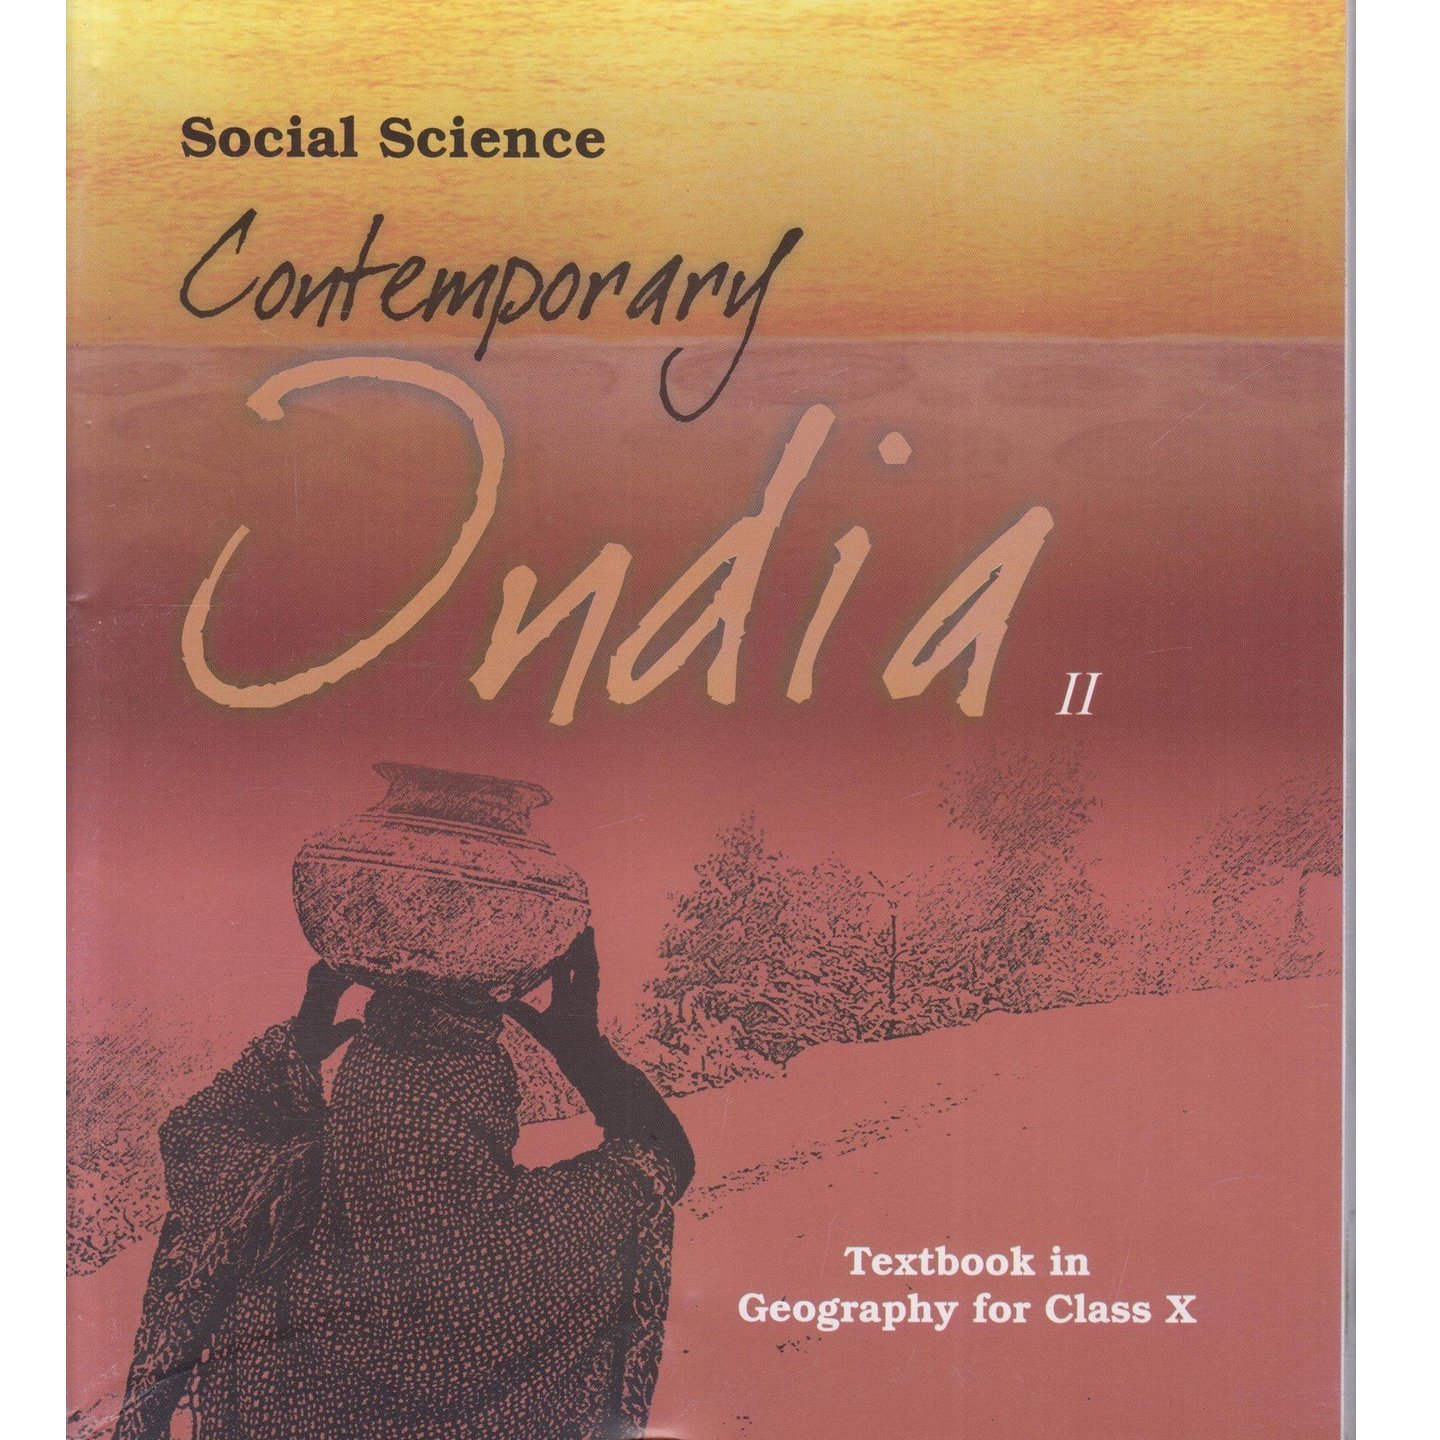 GEOGRAPHY CONTEMPORARY INDIA II